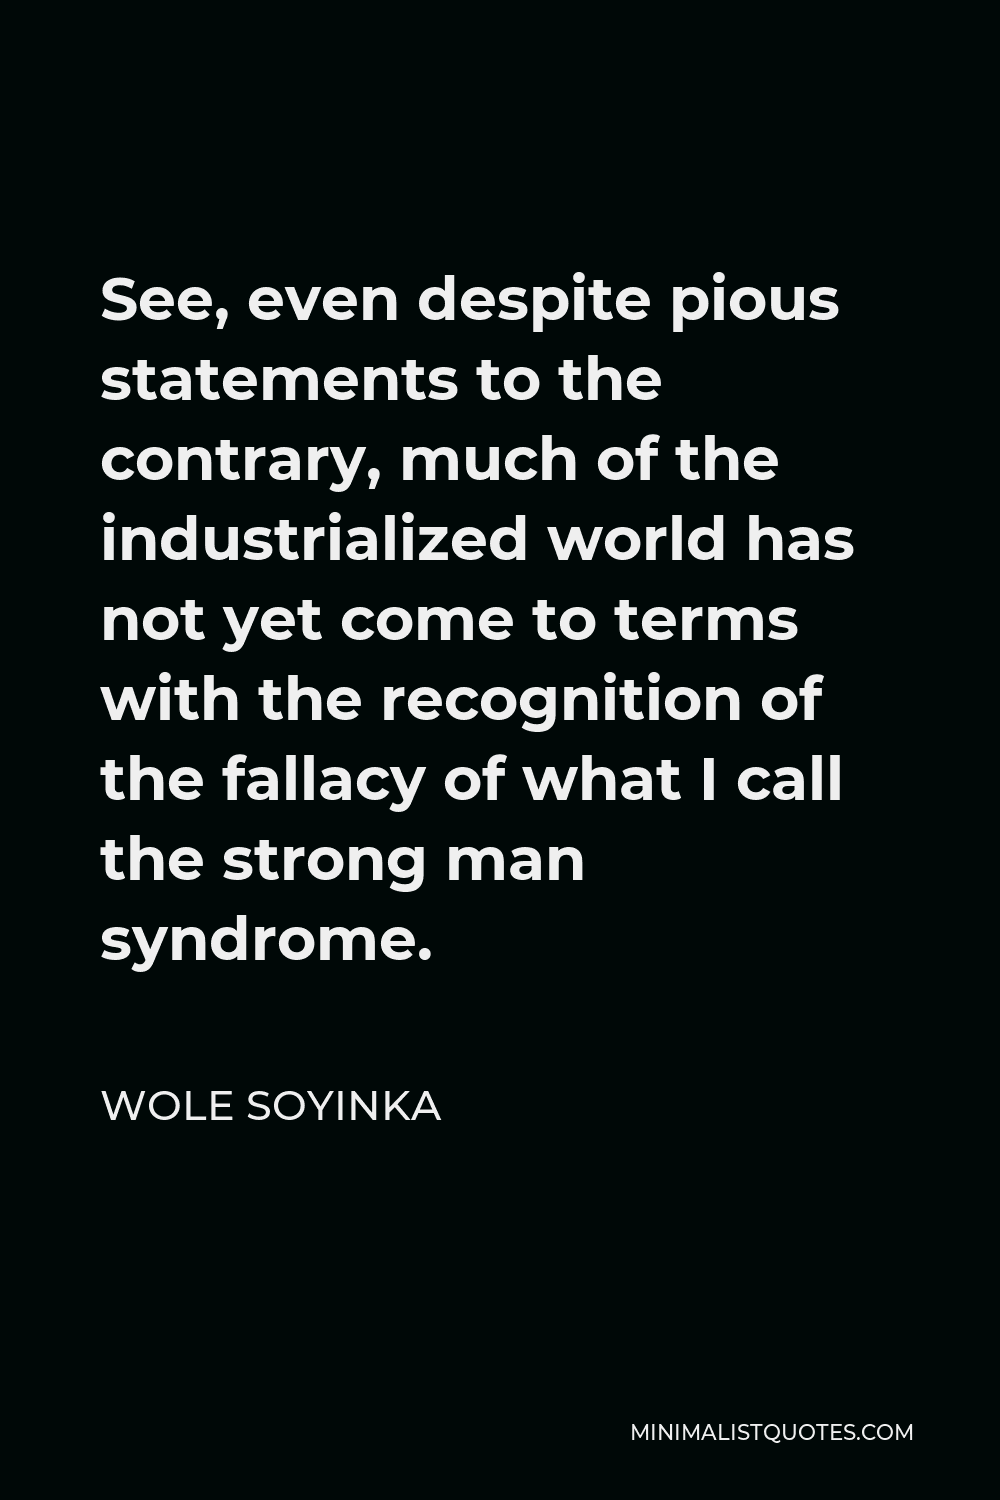 Wole Soyinka Quote - See, even despite pious statements to the contrary, much of the industrialized world has not yet come to terms with the recognition of the fallacy of what I call the strong man syndrome.